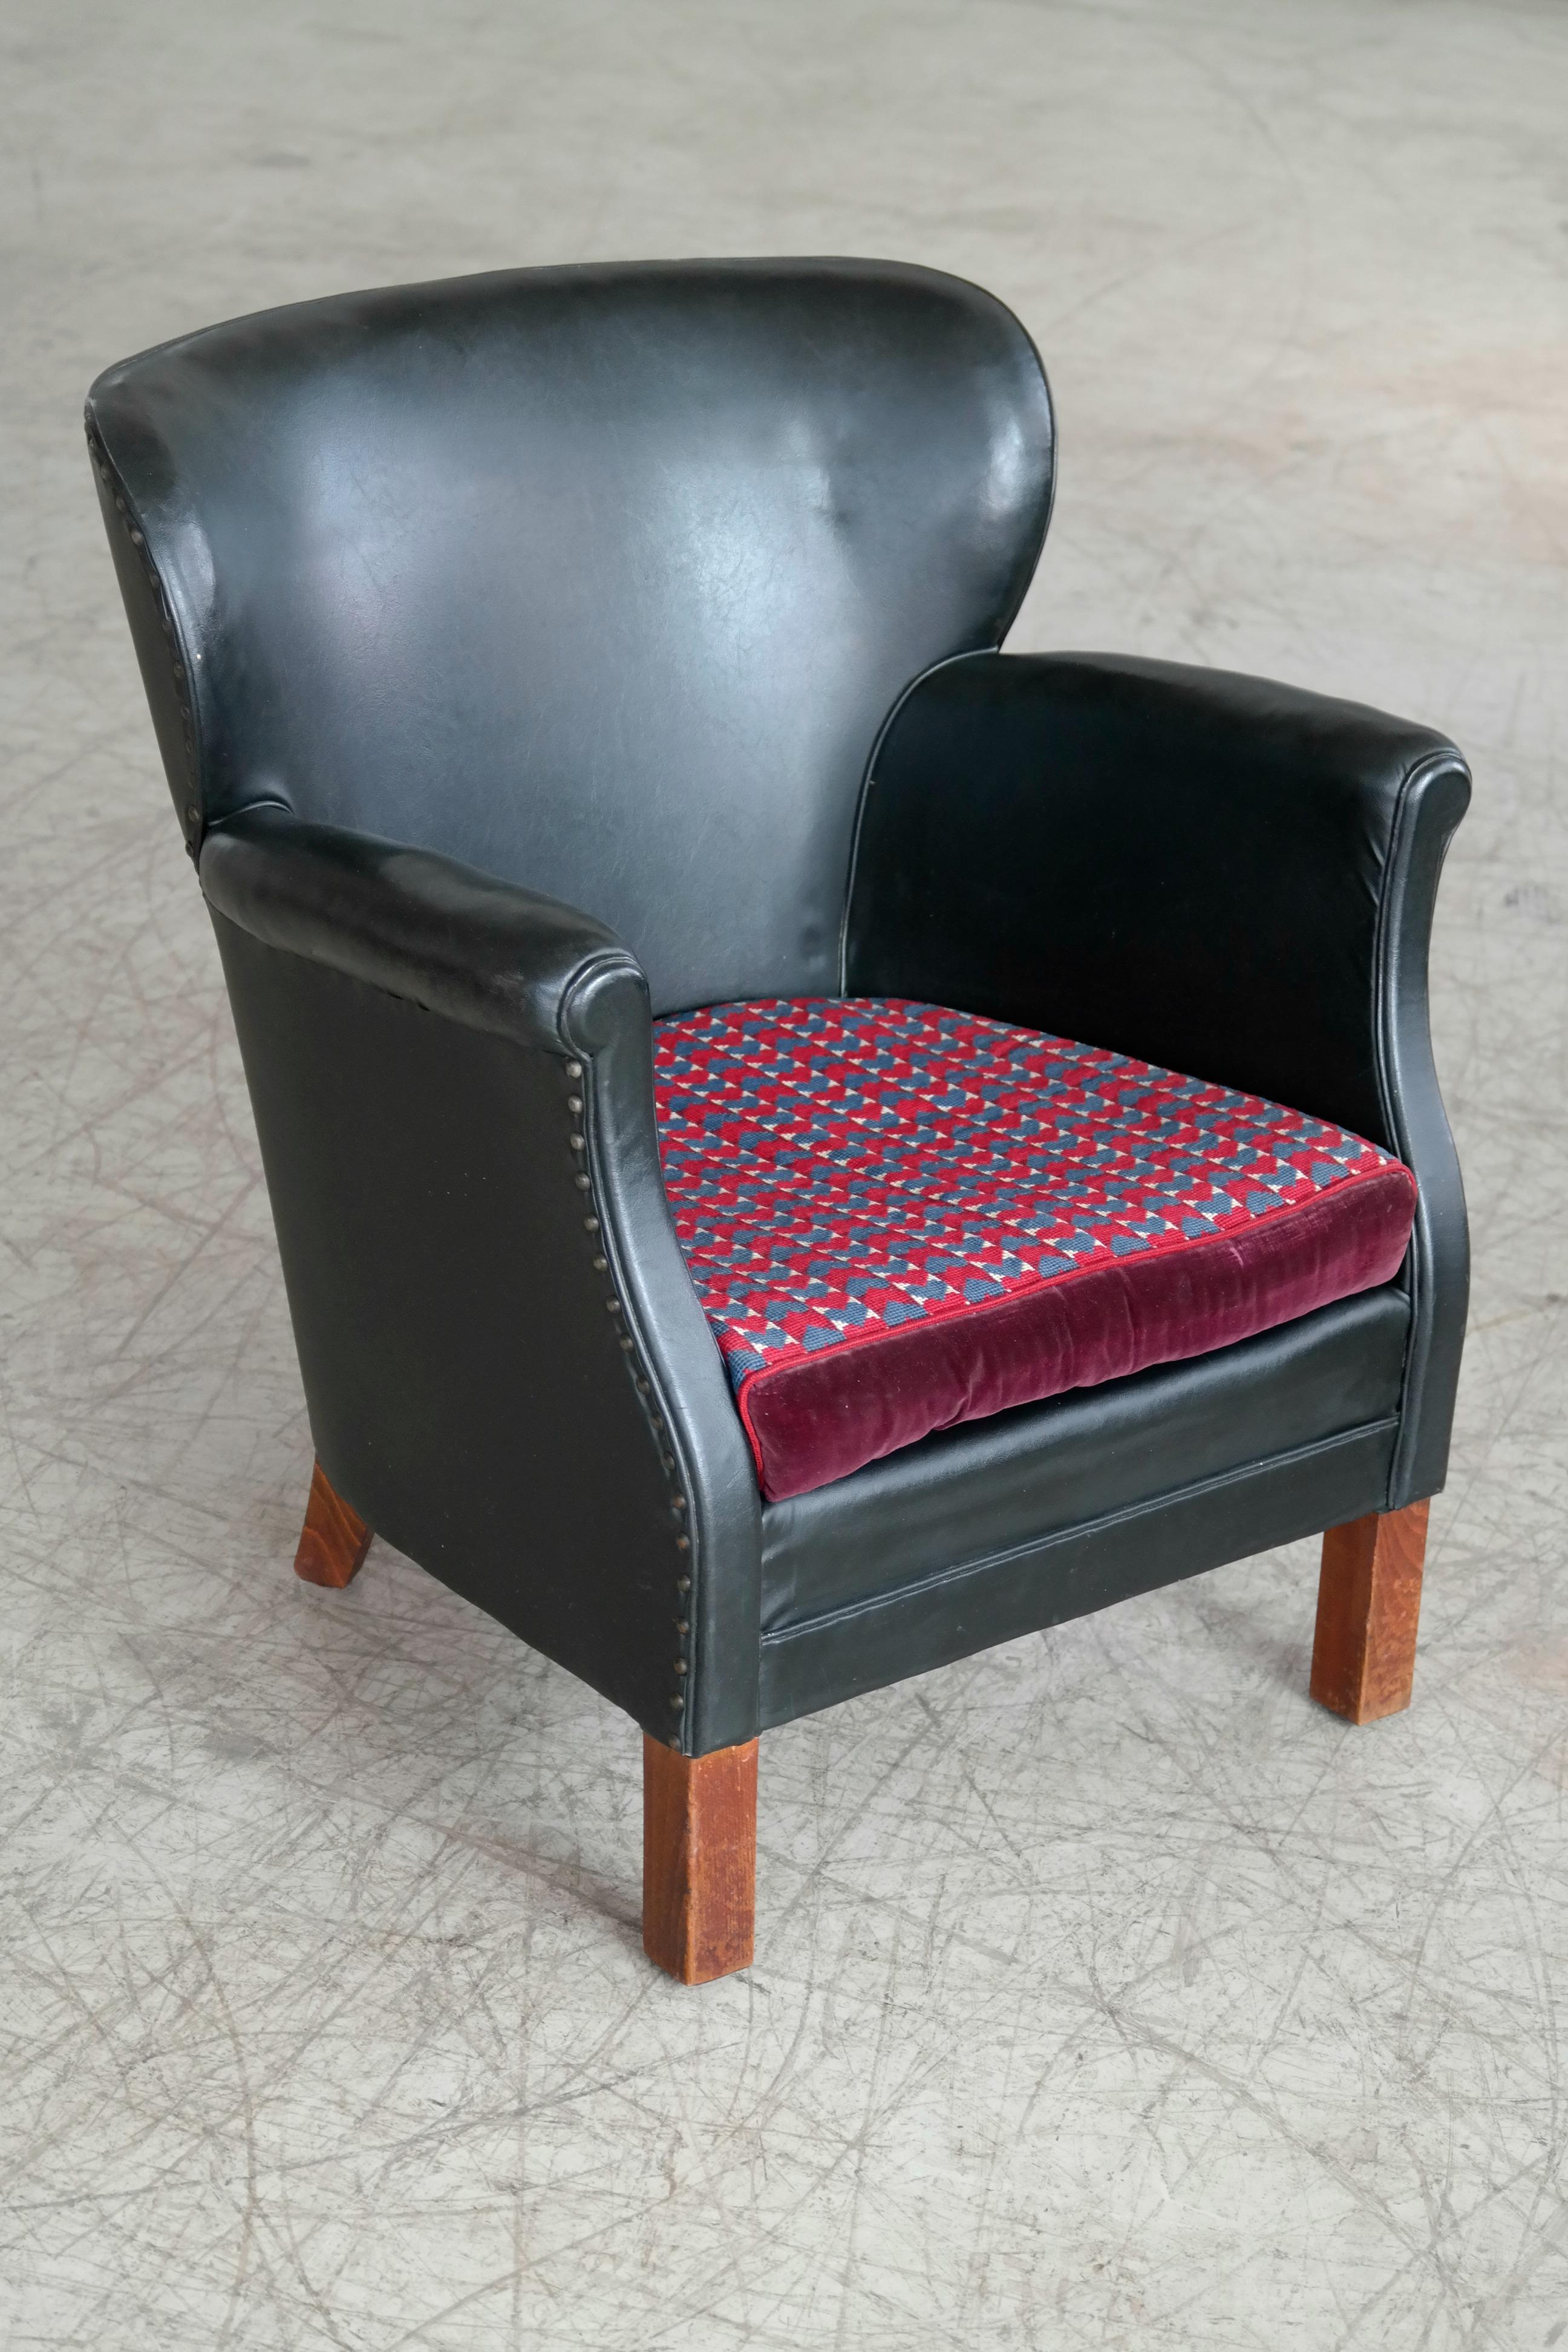 A Classic Danish small scale club chair from the post Art Deco period of the late 1930s. Fantastic patinated original black leather with a smooth back and brass tacks. Later added cushion. Noble patina and wear to especially the armrests. Fantastic